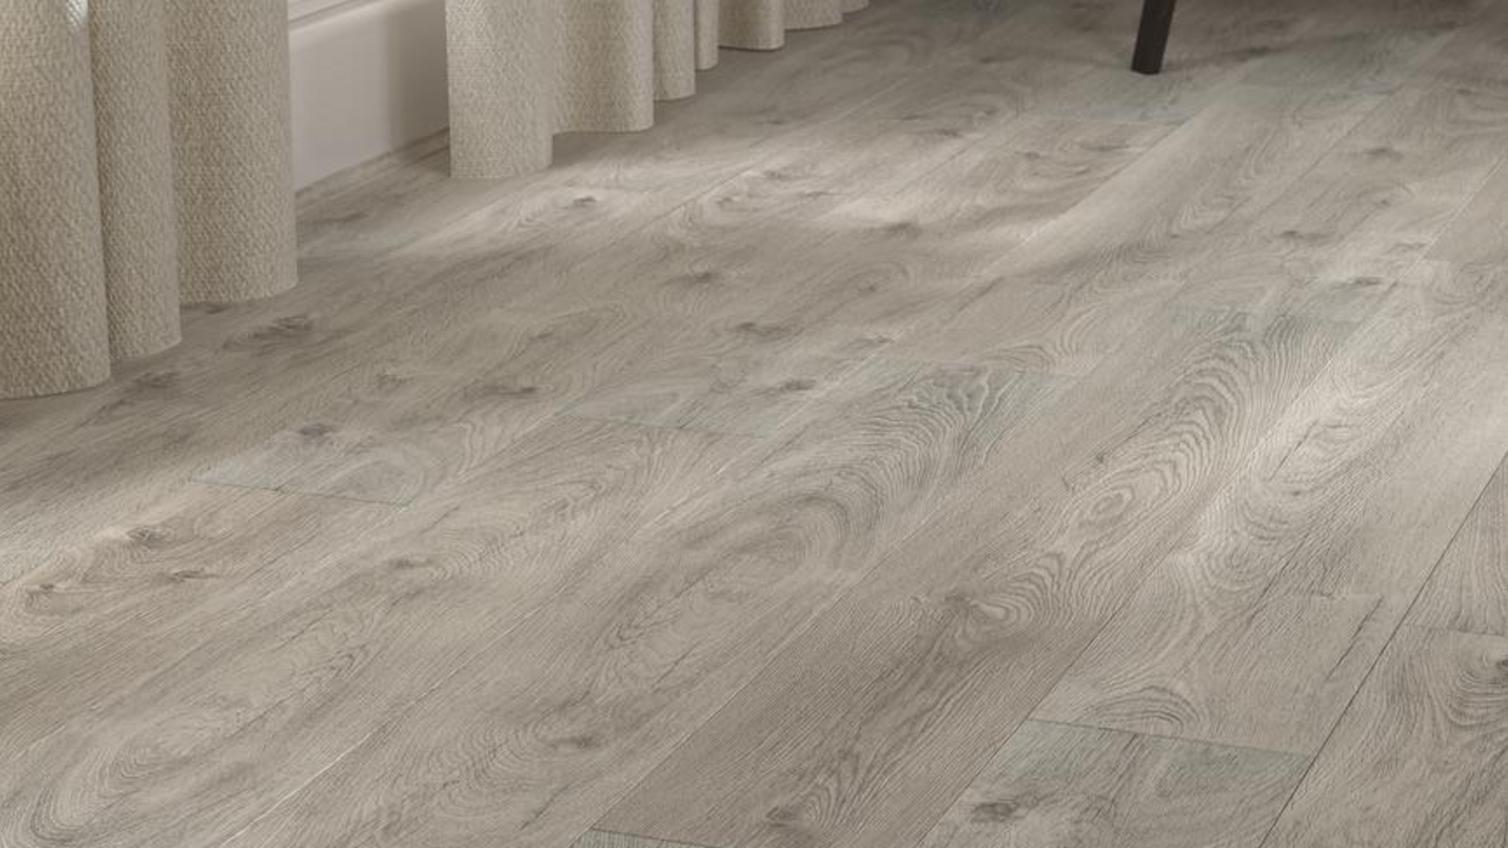 Rustic wooden flooring in a light grey tone